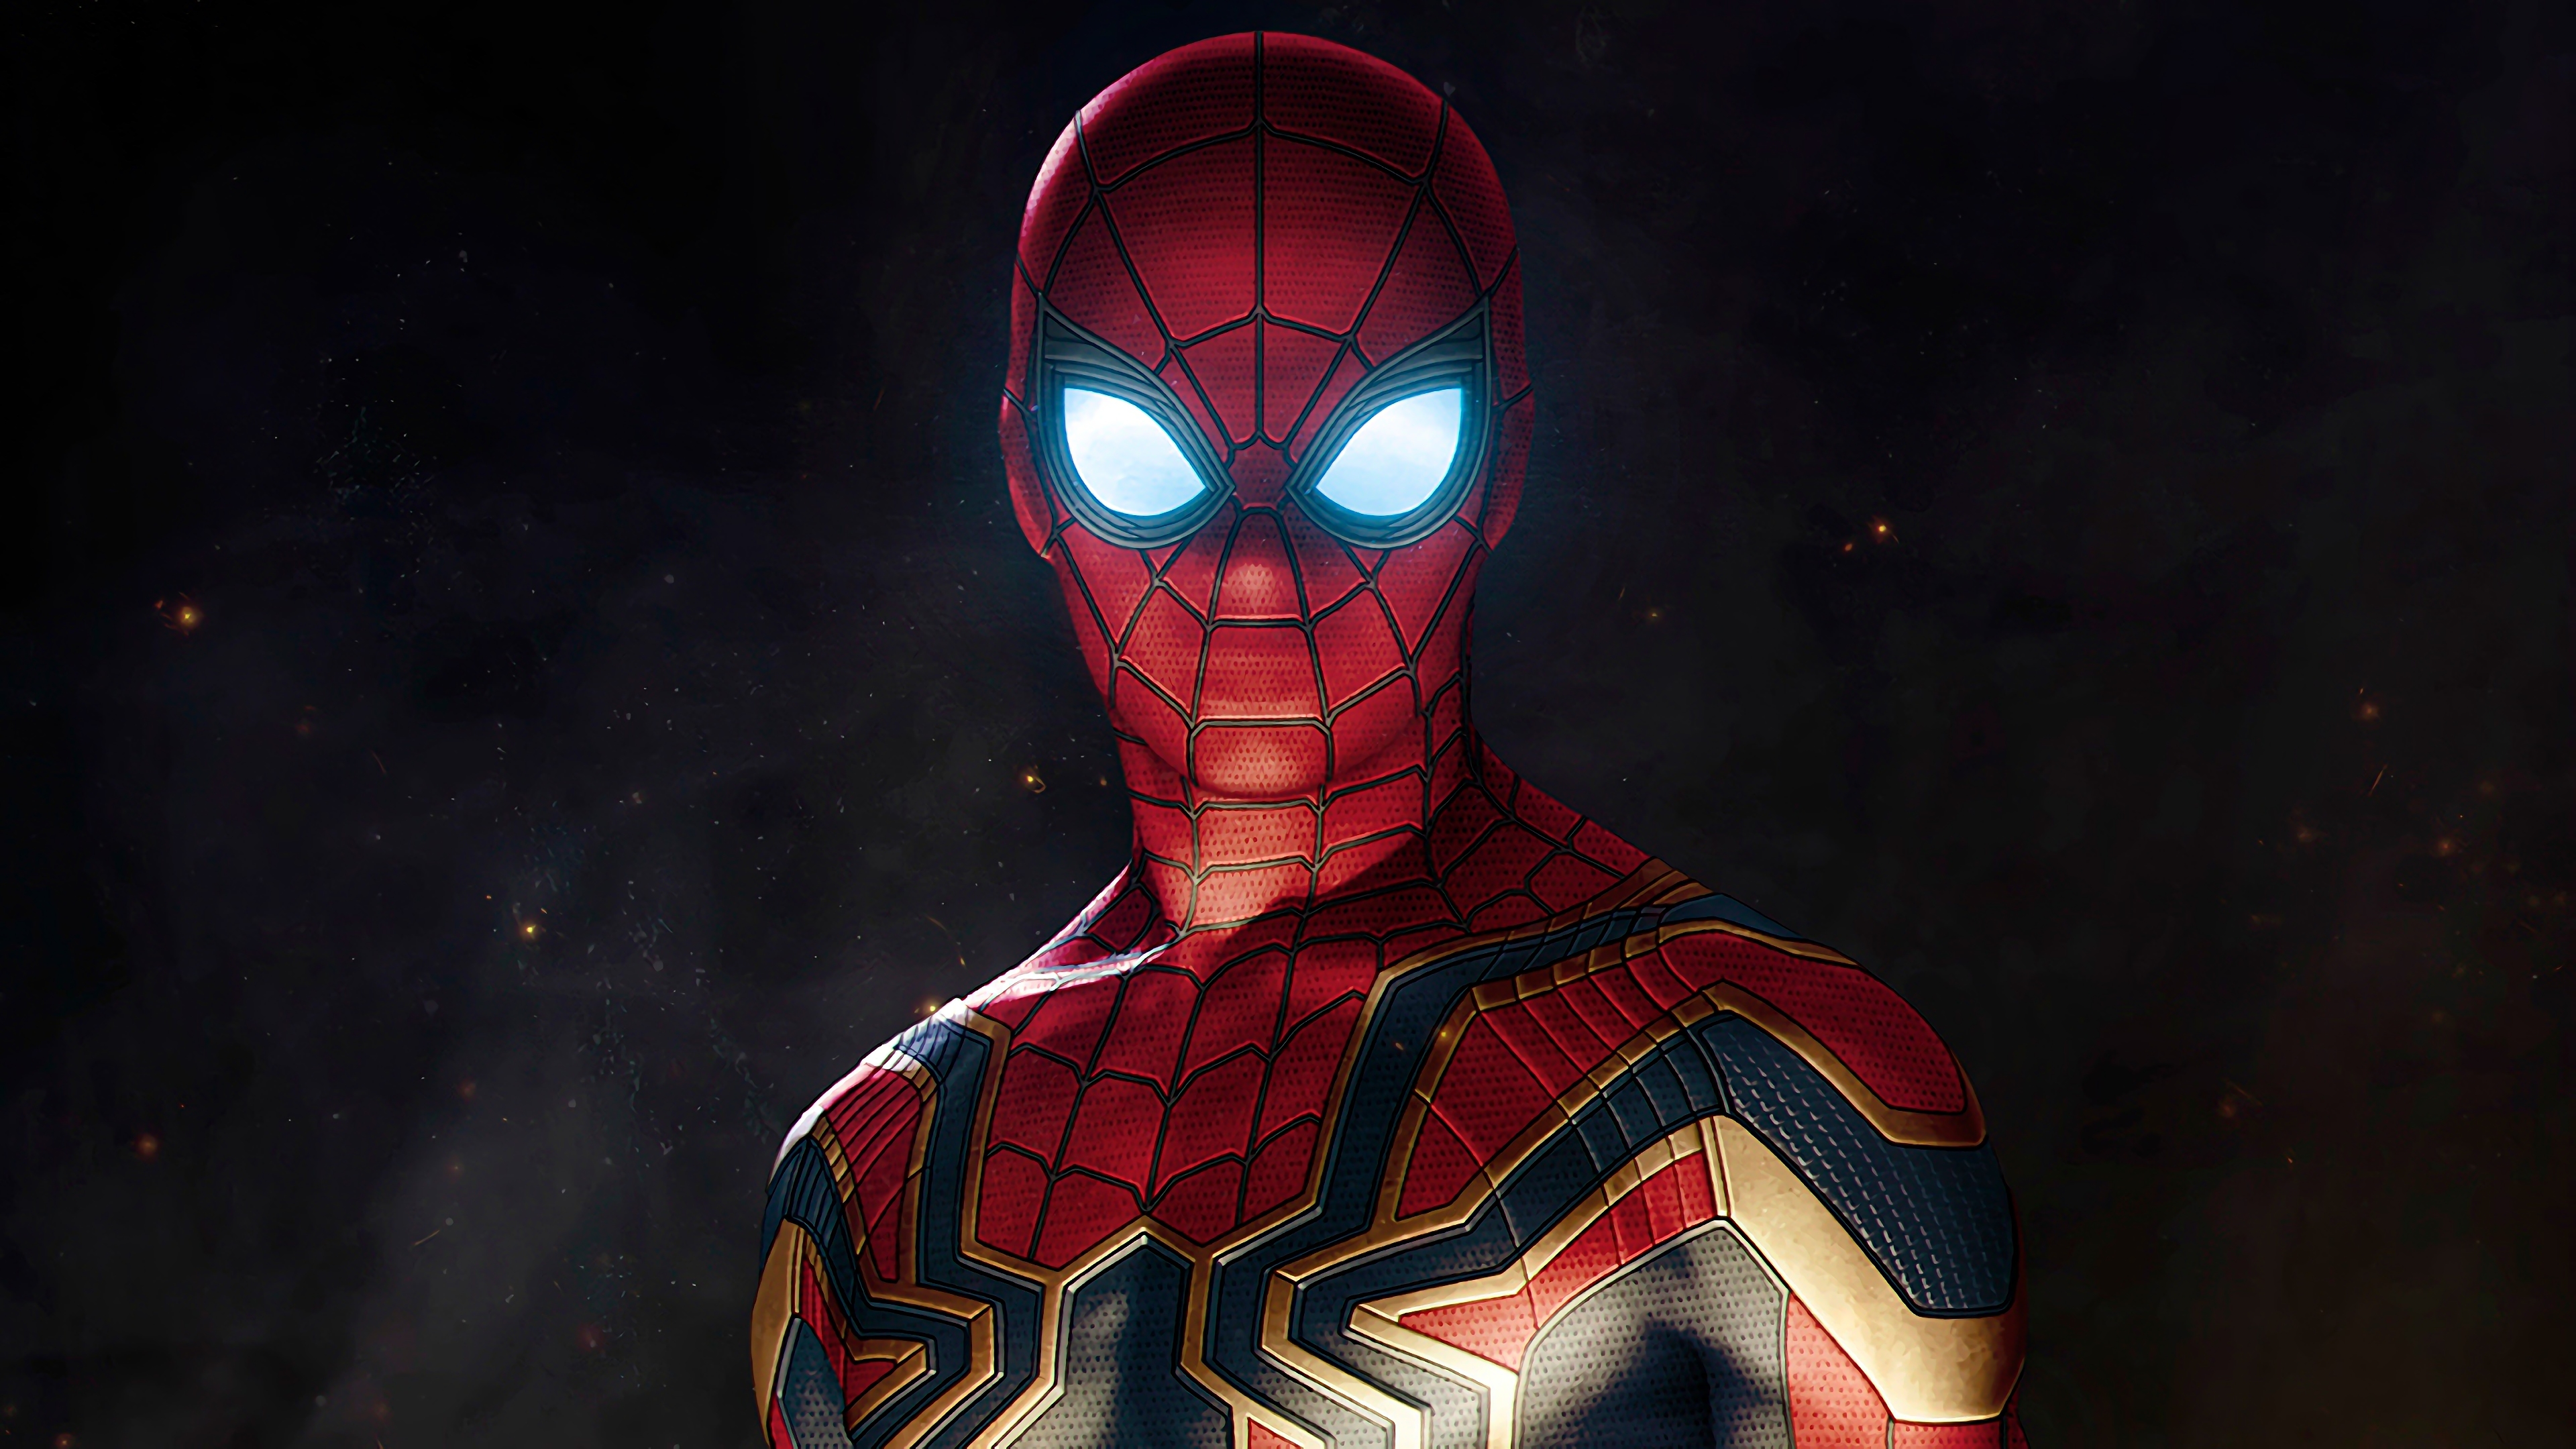 spider man, avengers: infinity war, glowing eyes, movie, peter parker, the avengers